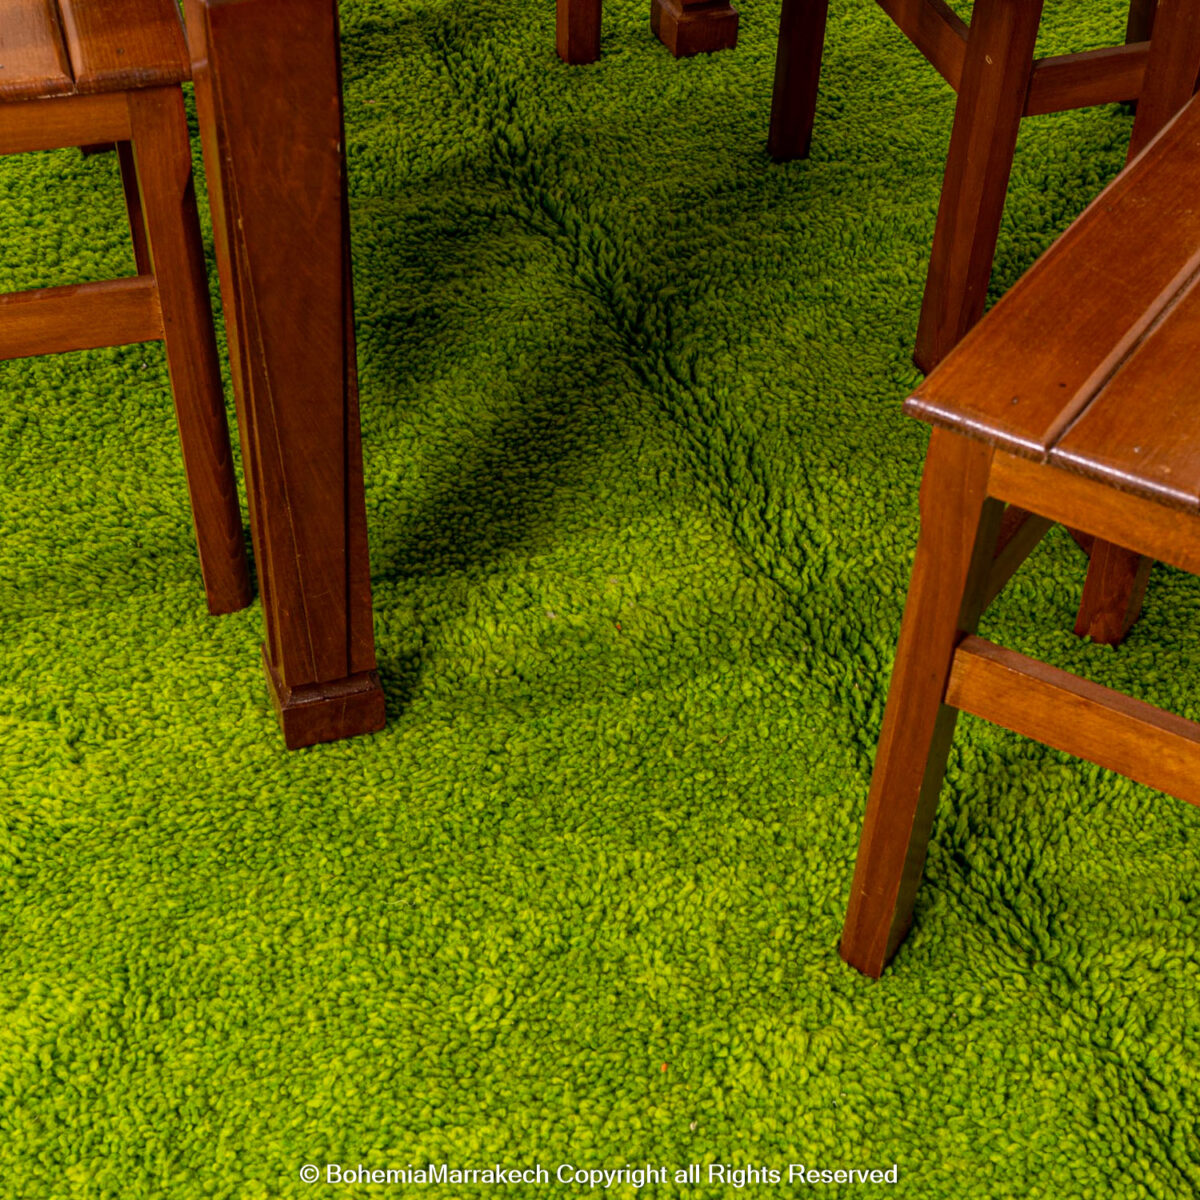 Green carpet rug, rugs in green, green color rug, a green rug, green area rug, green area carpet, sage green rug, rugs with sage green, blue and green rug, blue green rug, rugs with blue and green, blue and green carpet, rug green blue, rugs green and blue, blue & green rugs, greenery carpet, dark green rug, pink and green rug, pink green rug, rug dark green, rug pink and green, green and pink carpet, rug pink green, pink & green rug, olive green rug, green rugs for living room, green olive rug, green living room carpet, rugs for living room green, living room green rug, living room with green rug, sage rug, emerald green rug, sage green area rug, green outdoor rug, green runner rug, green carpet runner, rug emerald green, green rug outdoor, runner green rugs, green checkered rug, green shag rug, green and grey rug, blue and green area rug, grey green rug, blue green area rug, green and gray rug, green gray rug, rugs green and grey, area rugs with blue and green.